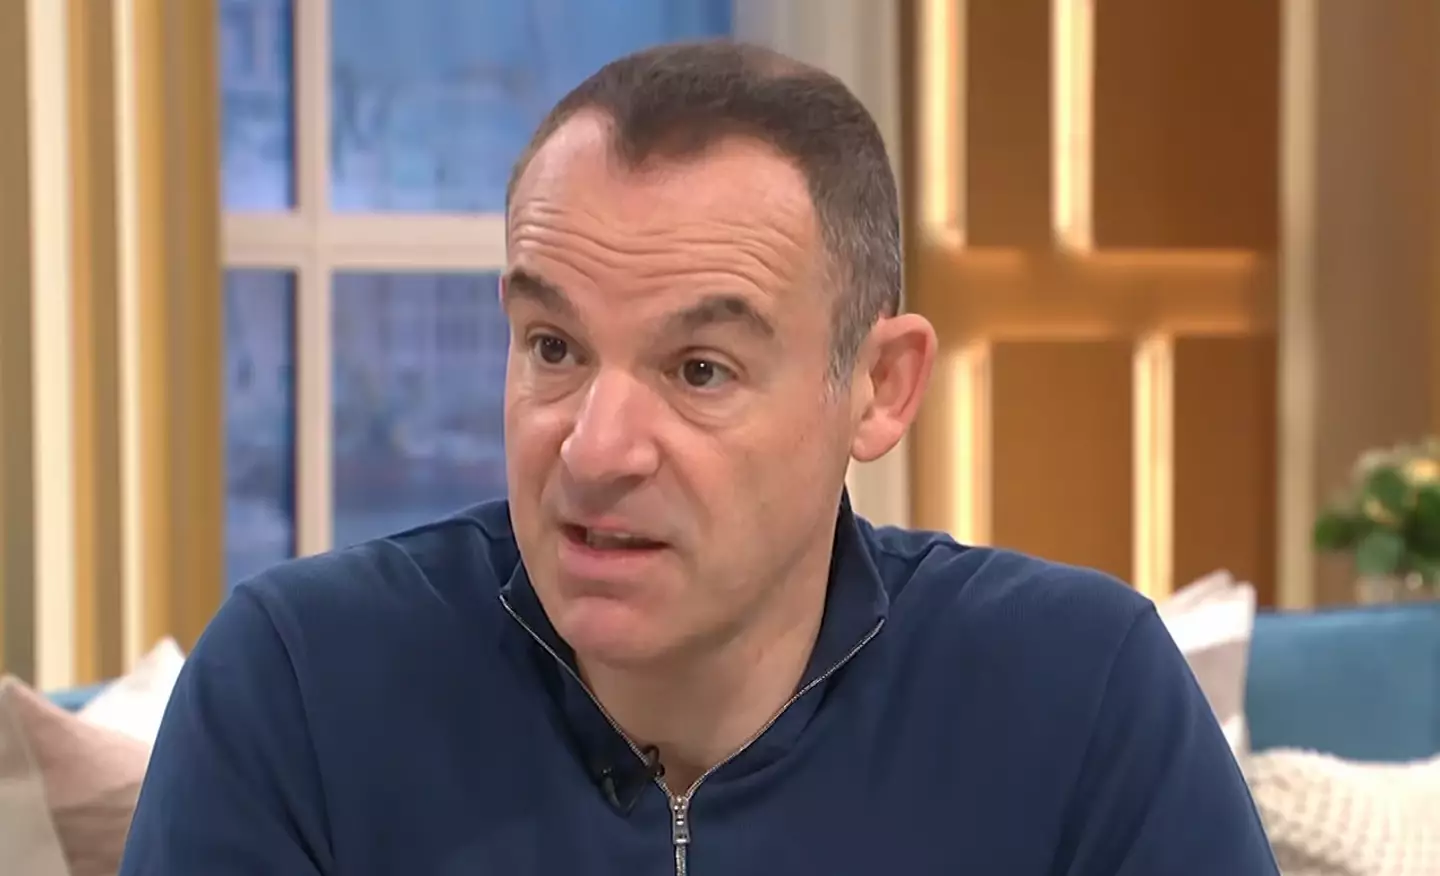 Martin Lewis has spoken about the issue a number of times.